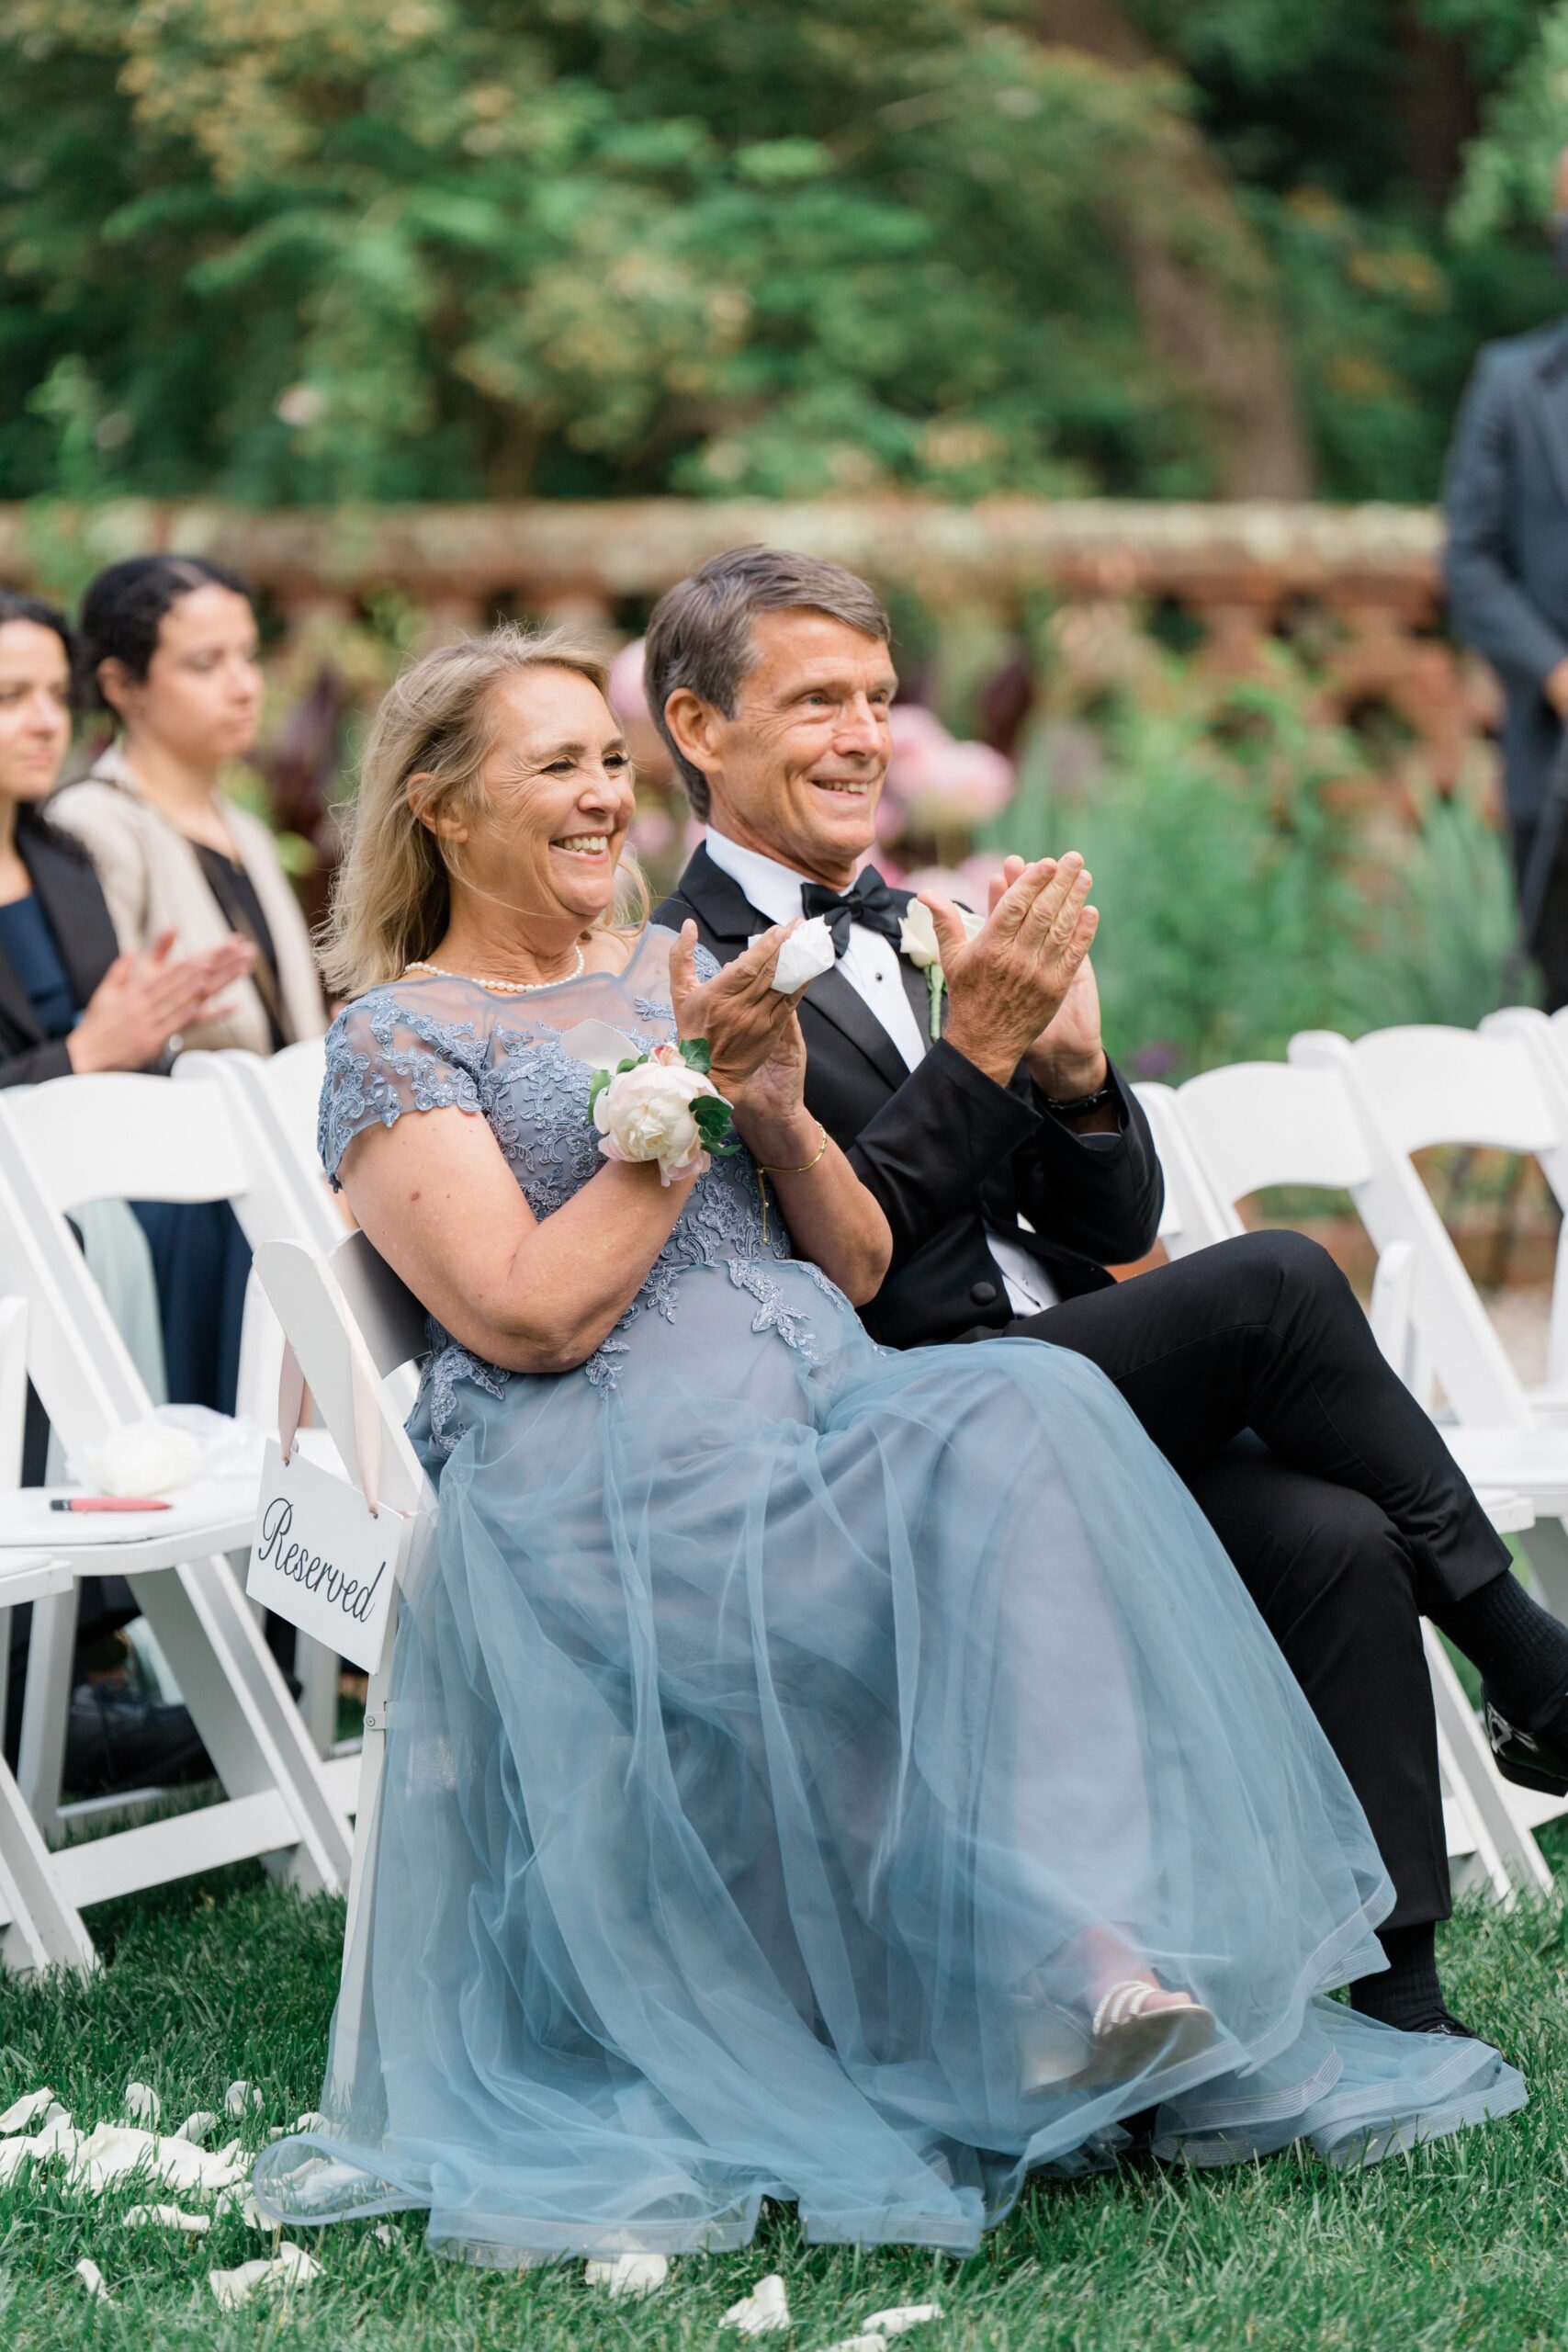 Parents of the groom clap during first kiss at boston summer wedding ceremony.